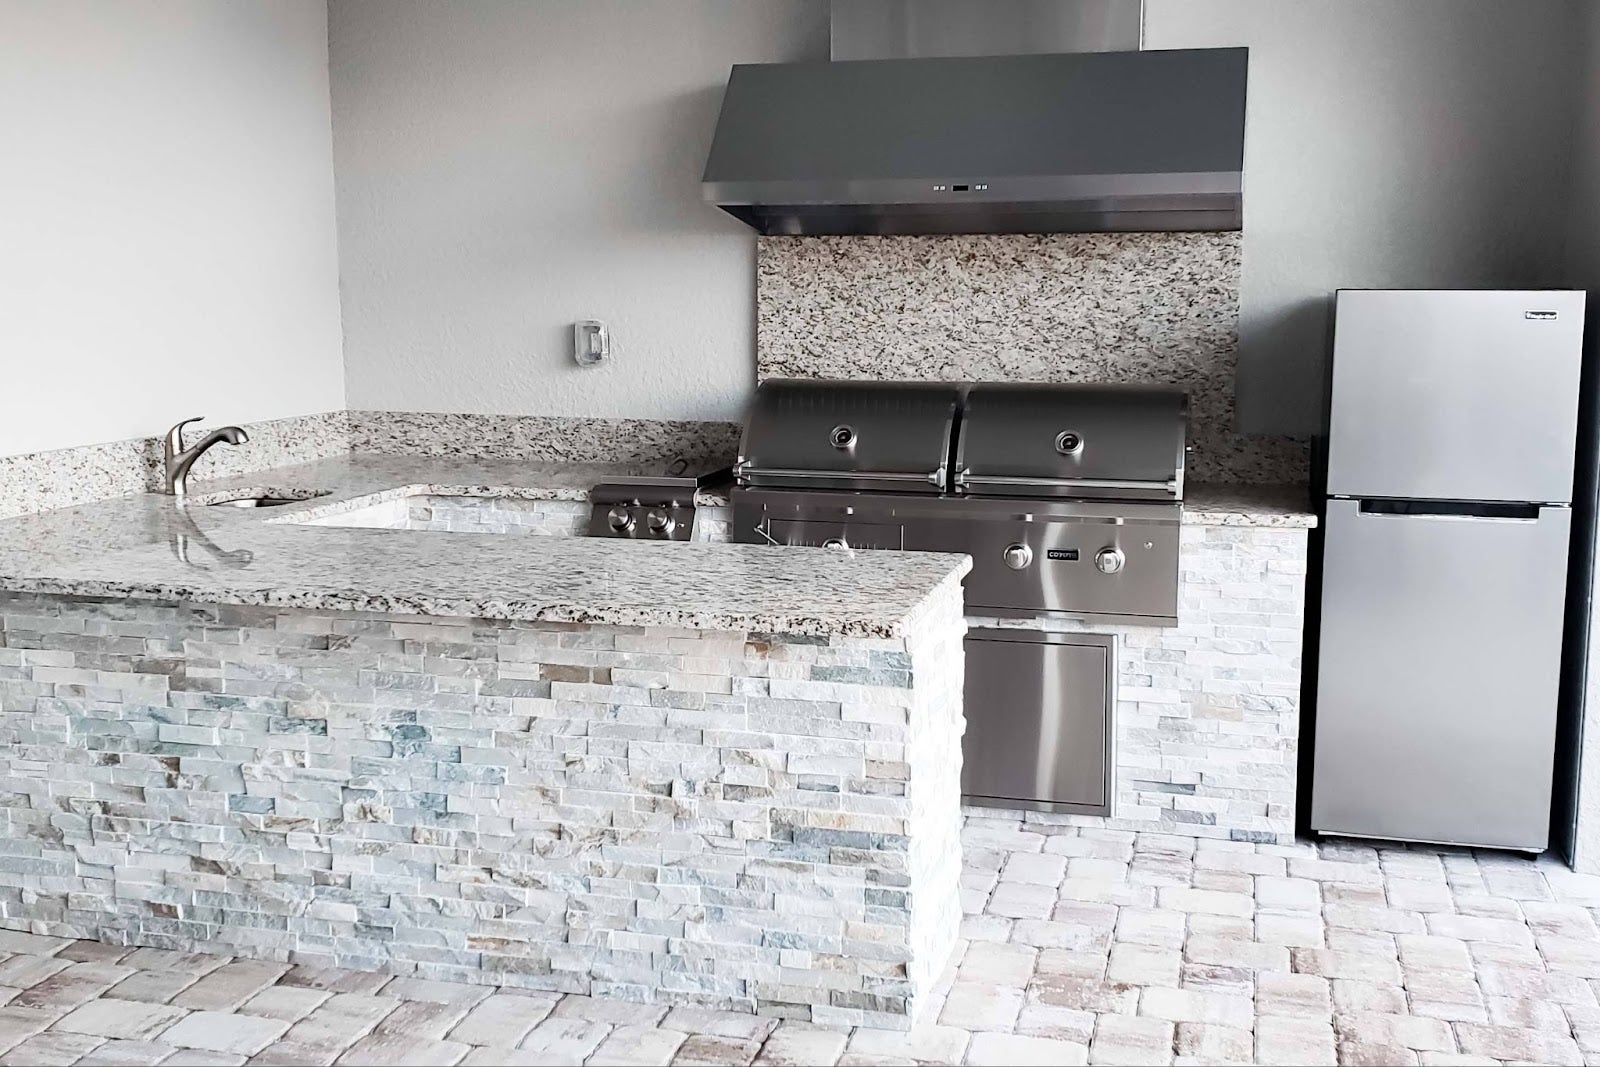 Relaxed Outdoor Kitchen: Stainless steel grill on a stone island with granite countertops. Spacious layout for easy grilling and entertaining. Smoke-clearing range hood and nearby fridge keep things convenient. Perfect for creating memories! - Proline Range Hoods - prolinerangehoods.com 